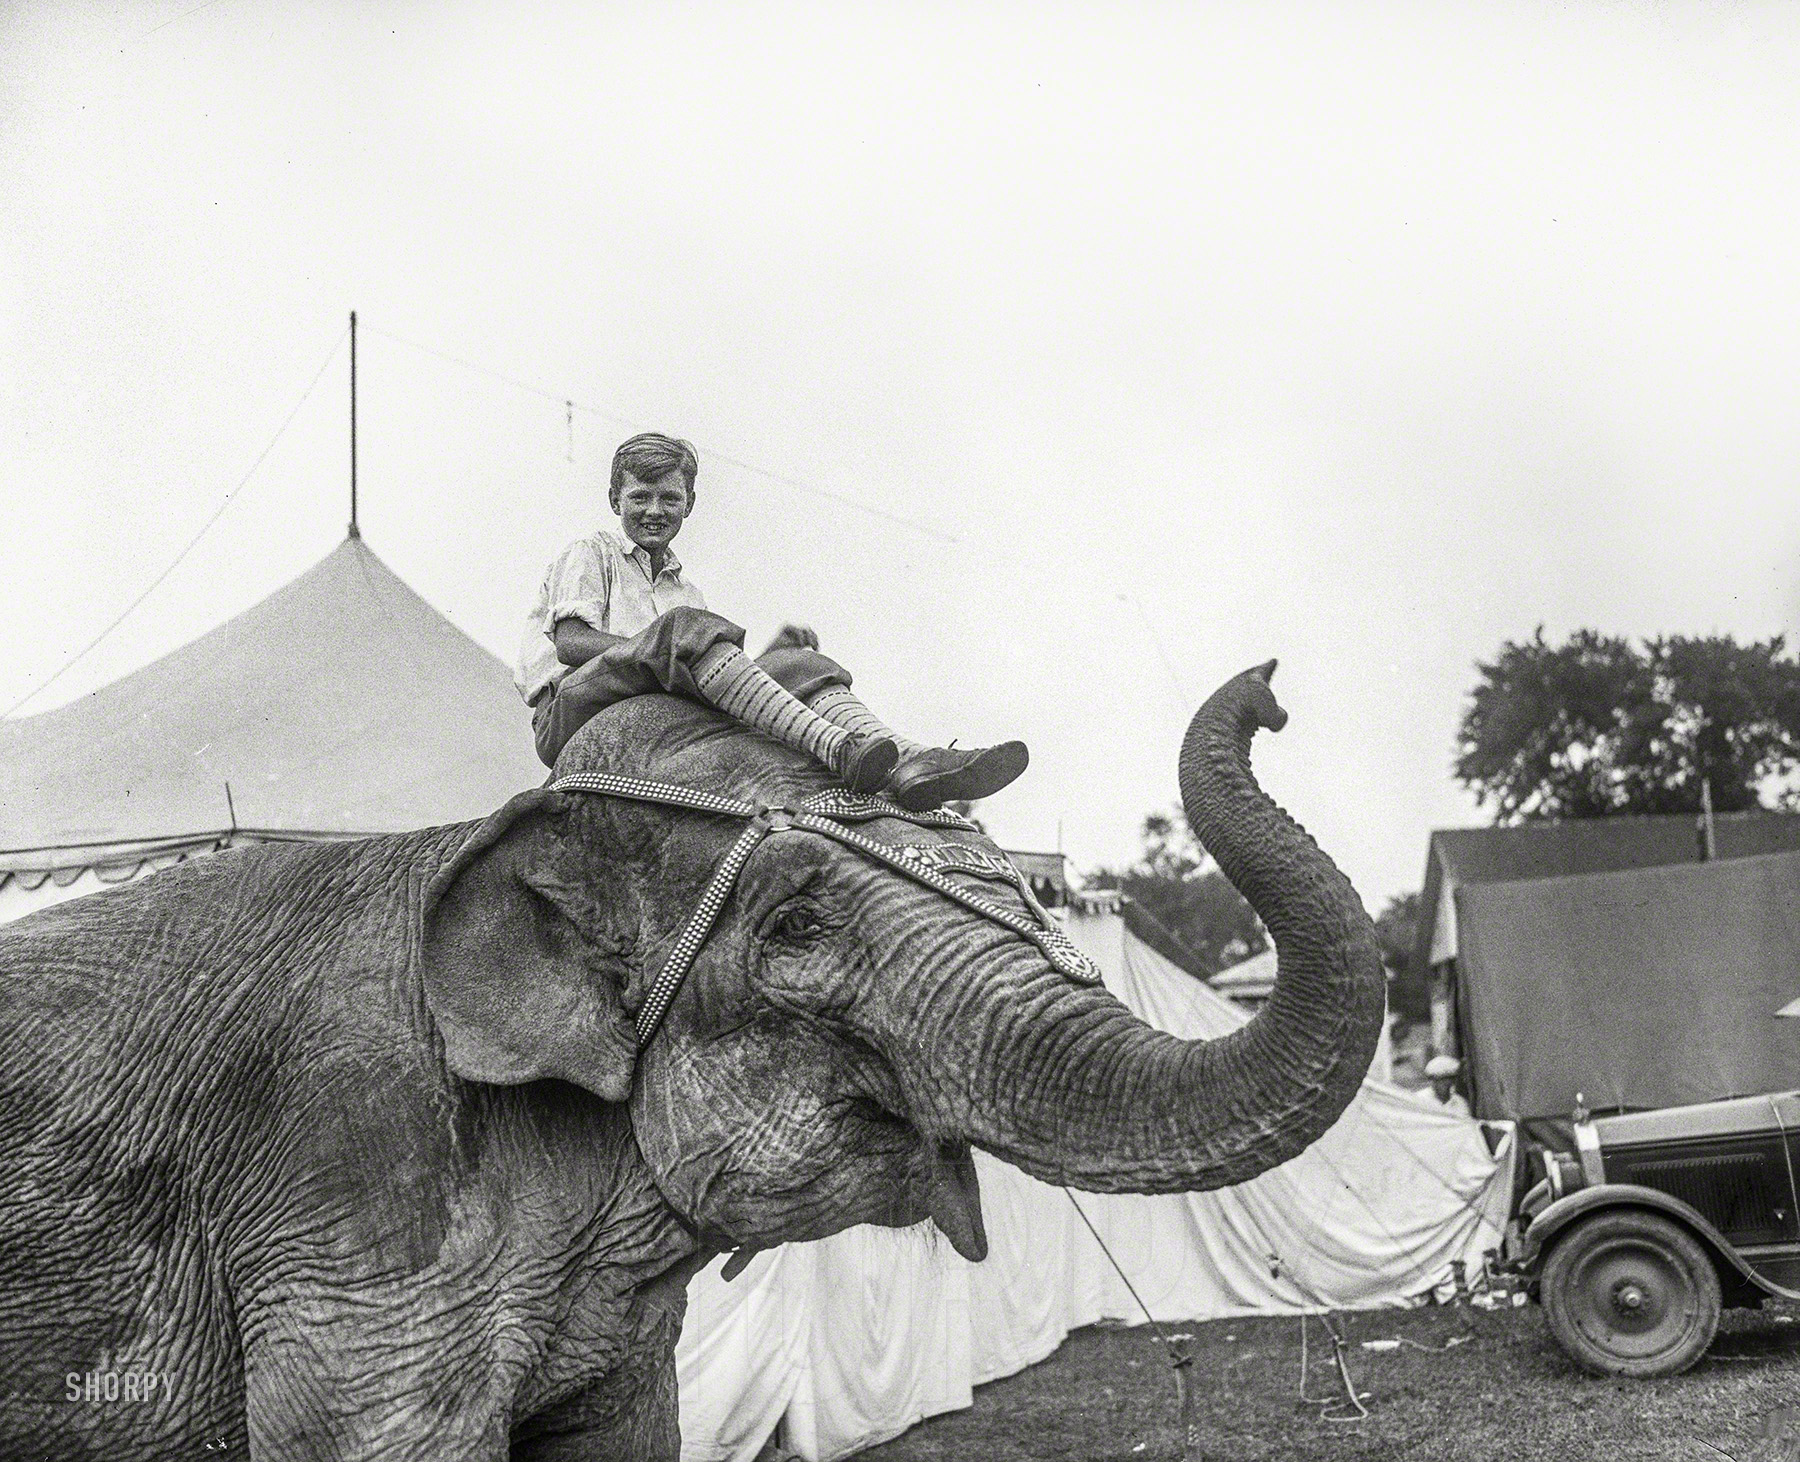 August 1927. Winchester, Virginia. "Boy on elephant." View full size.
YOUNGSTERS APPLAUD EDUCATED ELEPHANT
AT SHENANDOAH VALLEY FAIR
&nbsp; &nbsp; &nbsp; &nbsp; Tillie, the elephant who says "Papa" when her trainer speaks to her, was the hit of the afternoon. The talented pachyderm is one of a troupe of five performing elephants whose daily stunts will be one of the big features of this year's fair in Winchester. According to Dan Noonan, her trainer, Tillie is more than 100 years old. Her act was received with great applause.